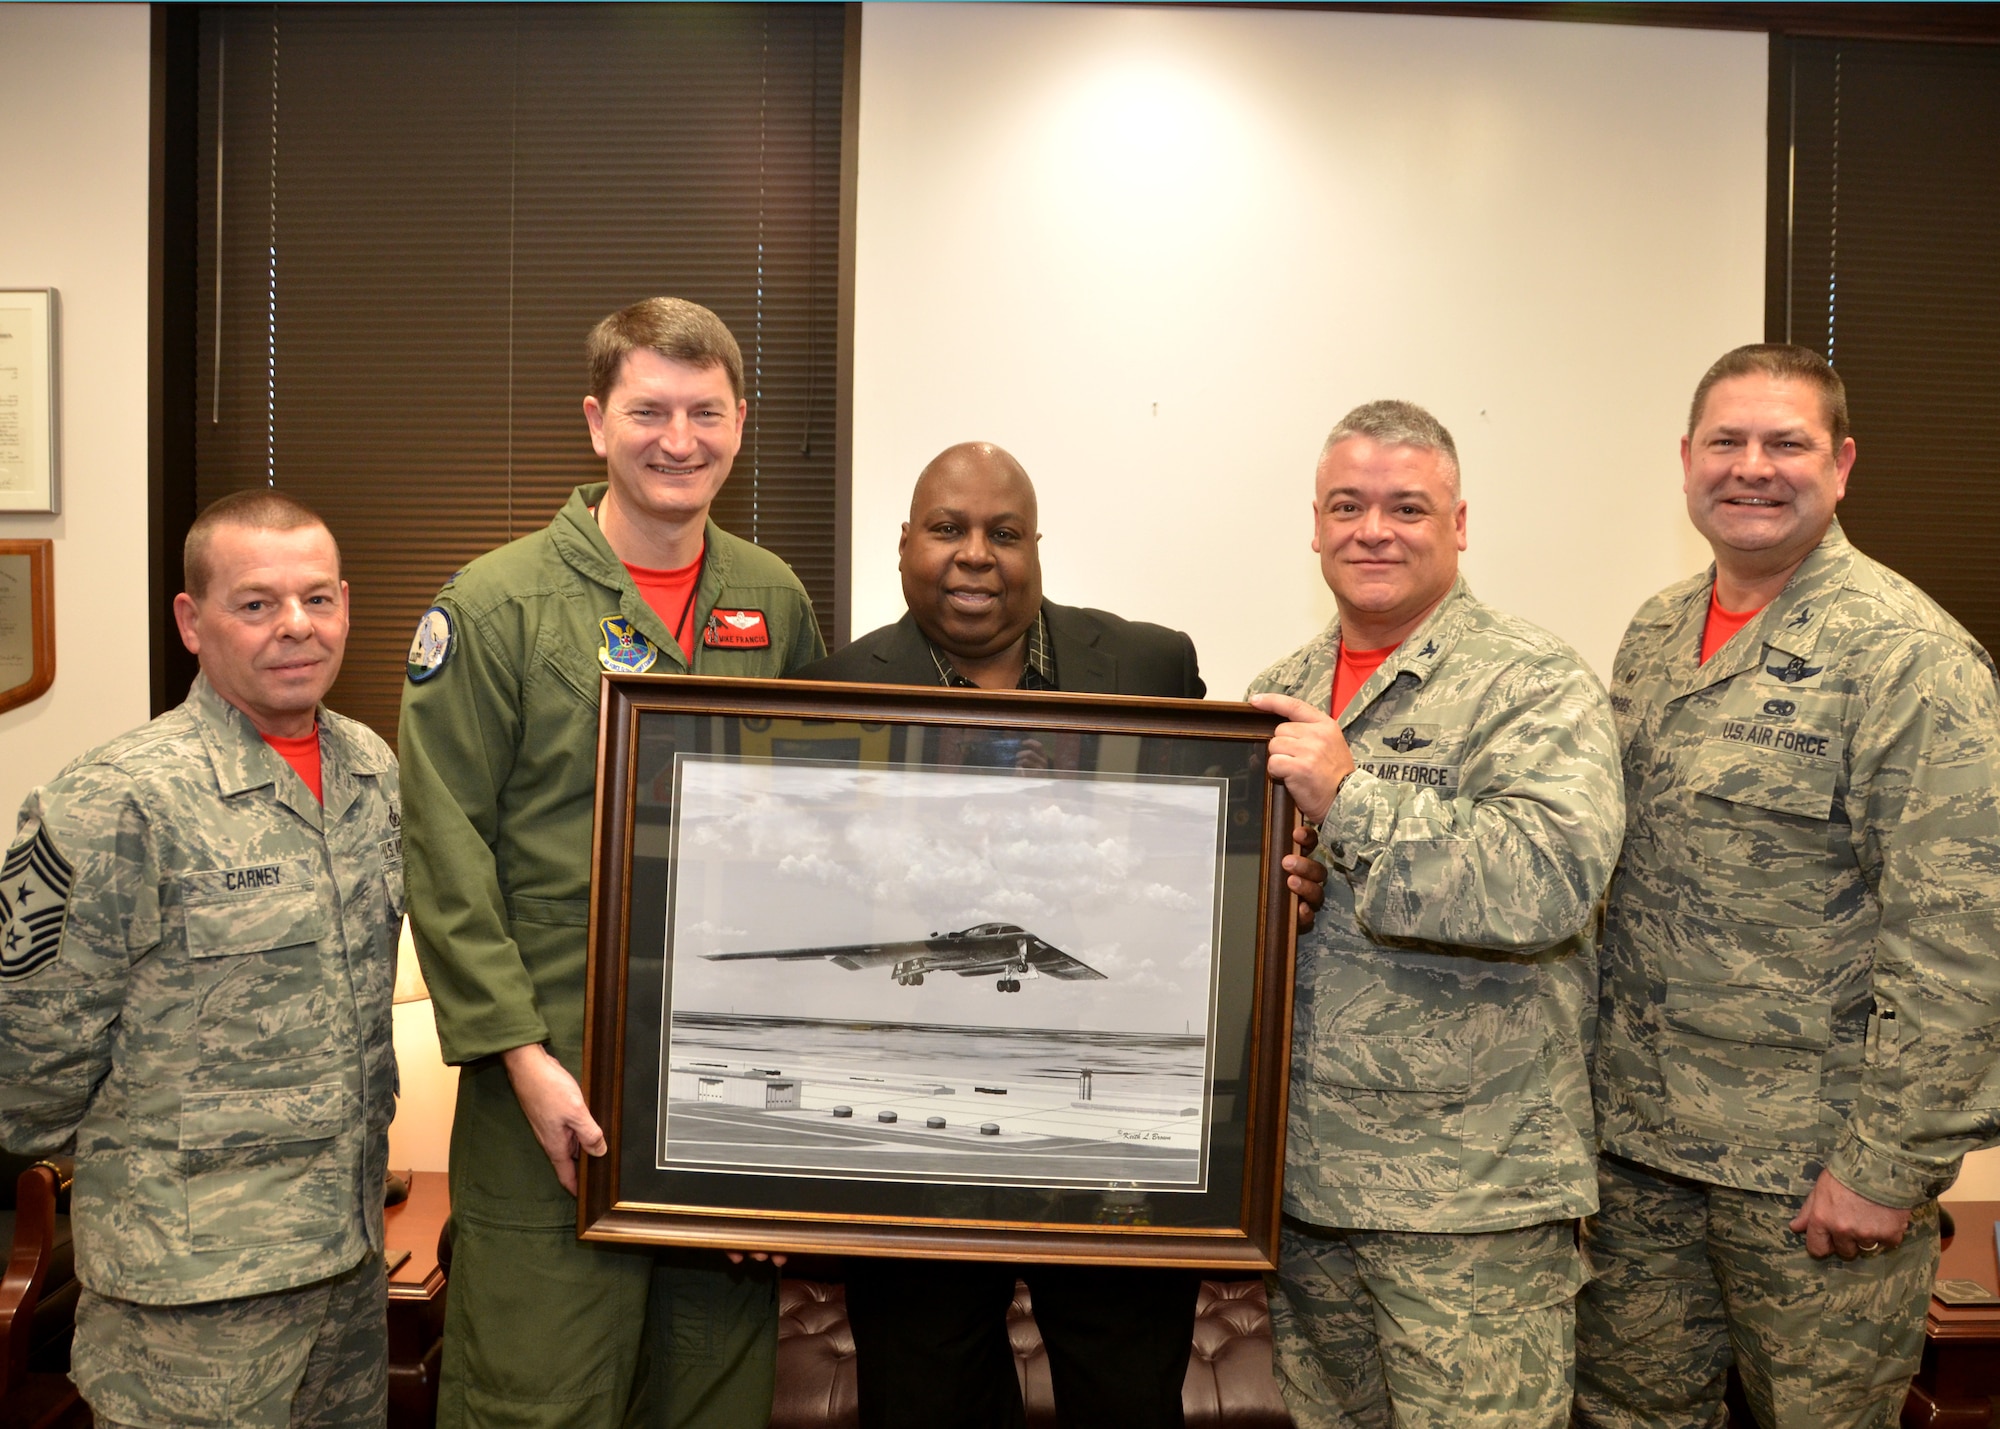 Retired Chief Master Sgt. Keith Brown, center, presents his original artwork to 131st Bomb Wing leadership, Feb. 8, 2015.  Brown designed the illustration of the B-2 “Spirit of Missouri” especially for the 131st Bomb Wing, to commemorate the dedication of the bomber to the Missouri Air National Guard.  Pictured from left to right: Chief Master Sgt. Paul Carney, 131st Bomb Wing command chief, Col. Michael Francis, 131st Bomb Wing commander, Brown, Col. Kenneth Eaves, 131st Bomb Wing vice commander, and Col. Michael Jurries, 131st Mission Support Group commander.  (U.S. Air National Guard photo by Tech. Sgt. Traci Payne)